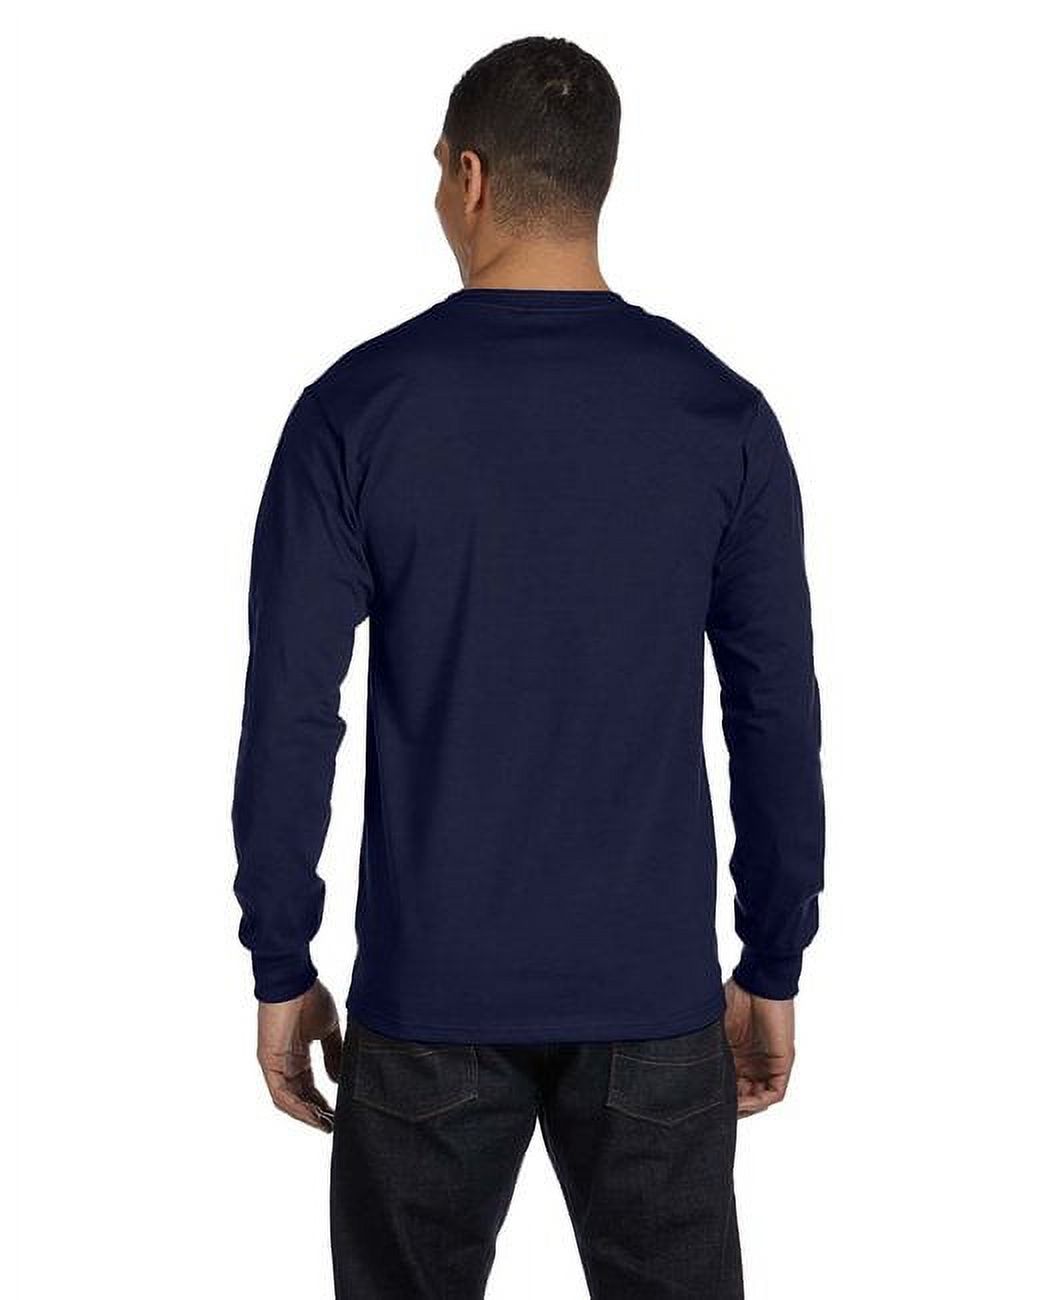 Hanes Men's and Big Men's Premium Beefy-T Long Sleeve T-Shirt, up to ...